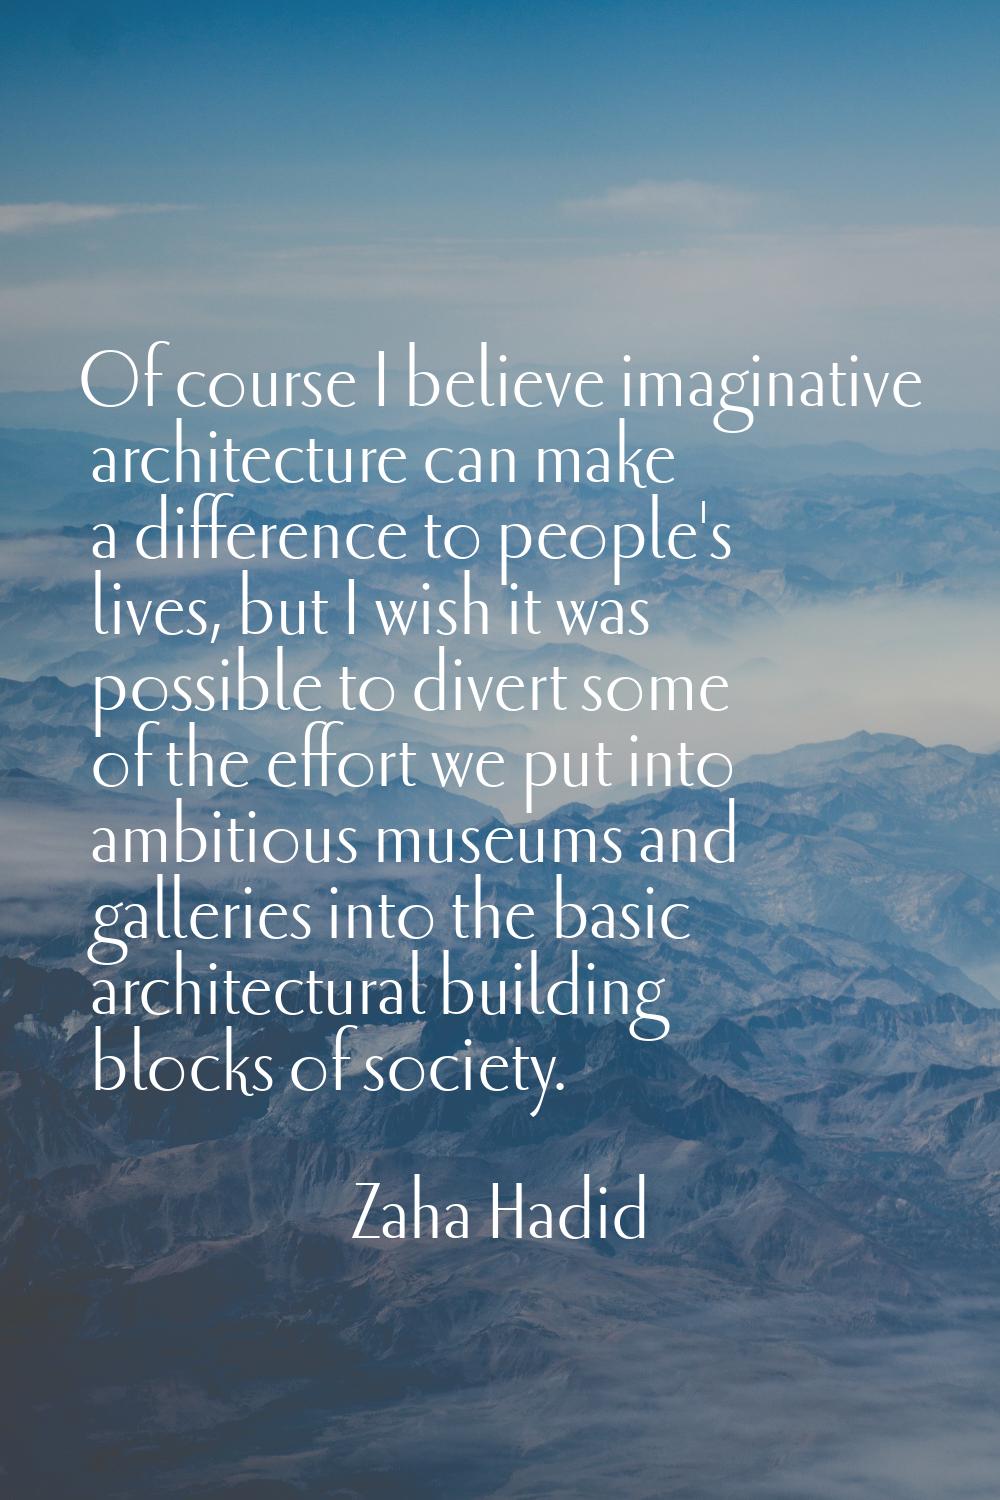 Of course I believe imaginative architecture can make a difference to people's lives, but I wish it